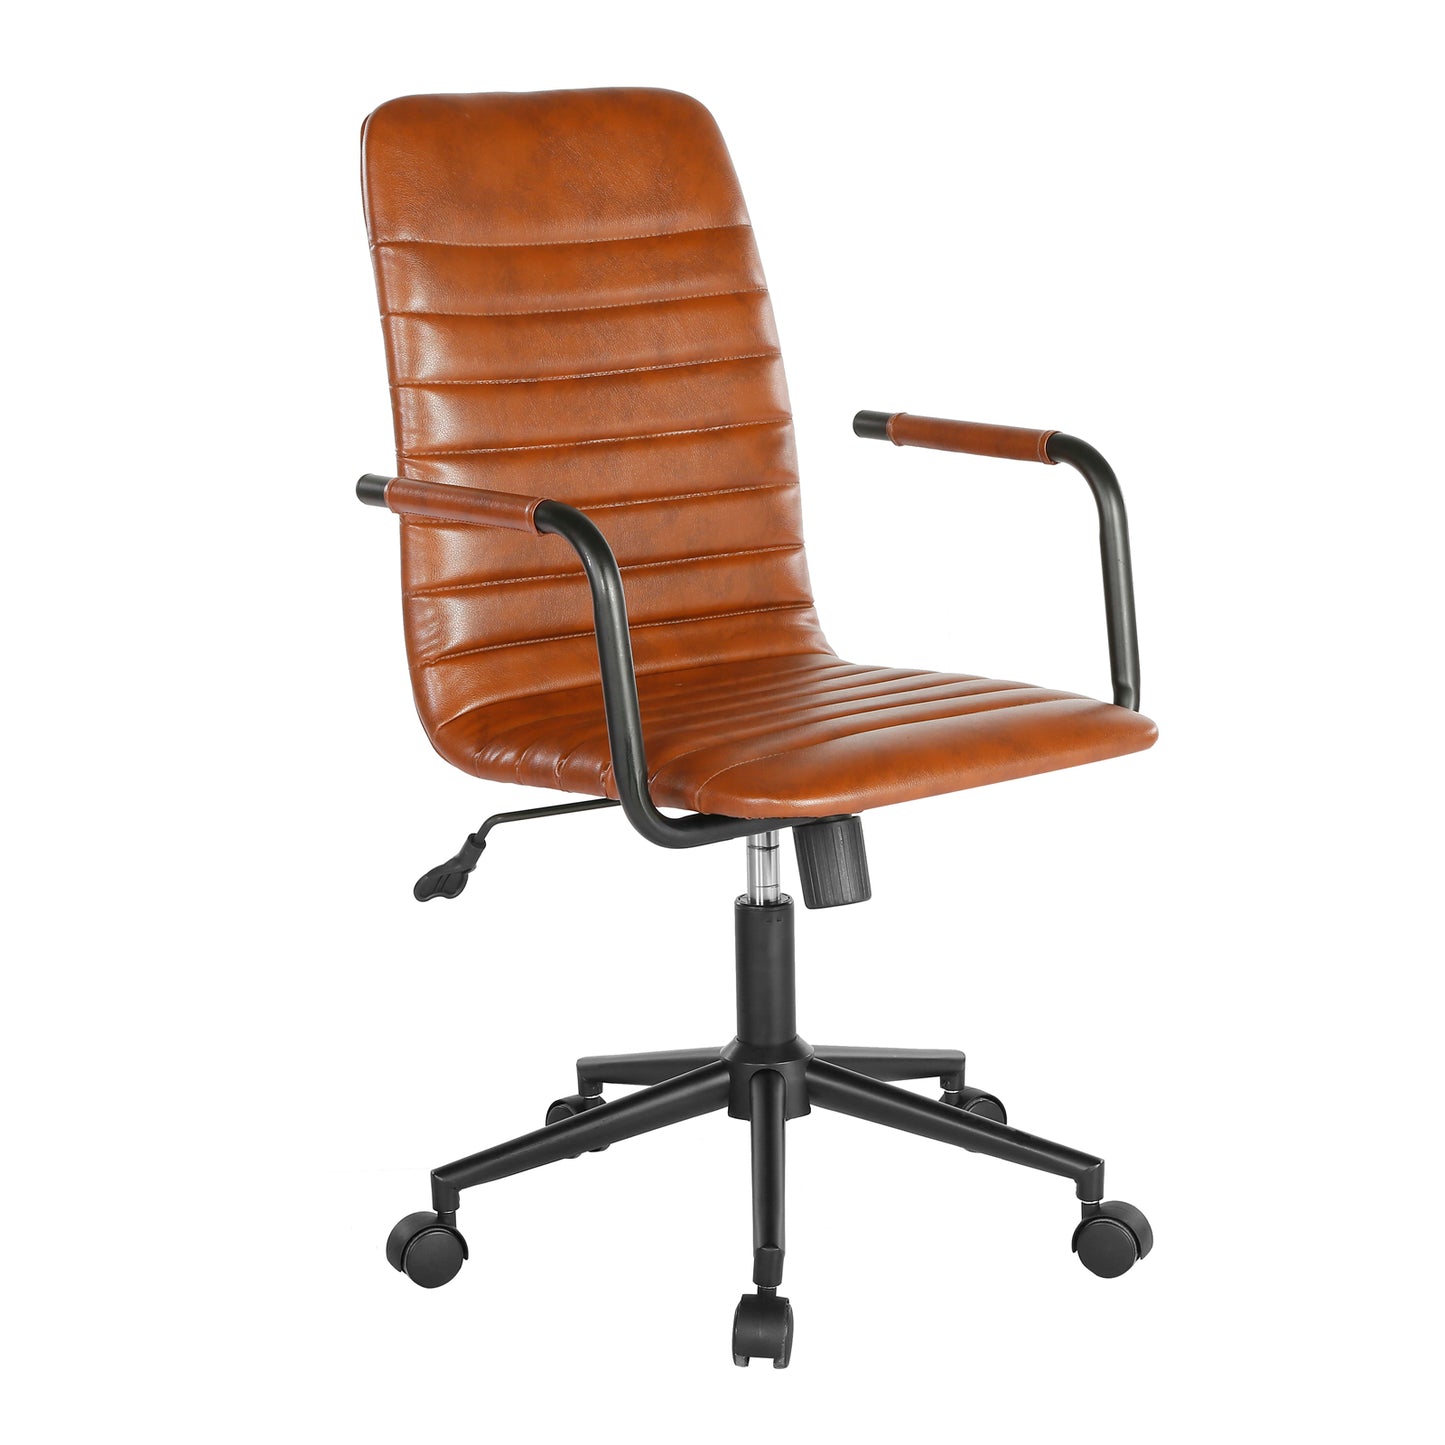 Beat swivel Chair - brown leatherette